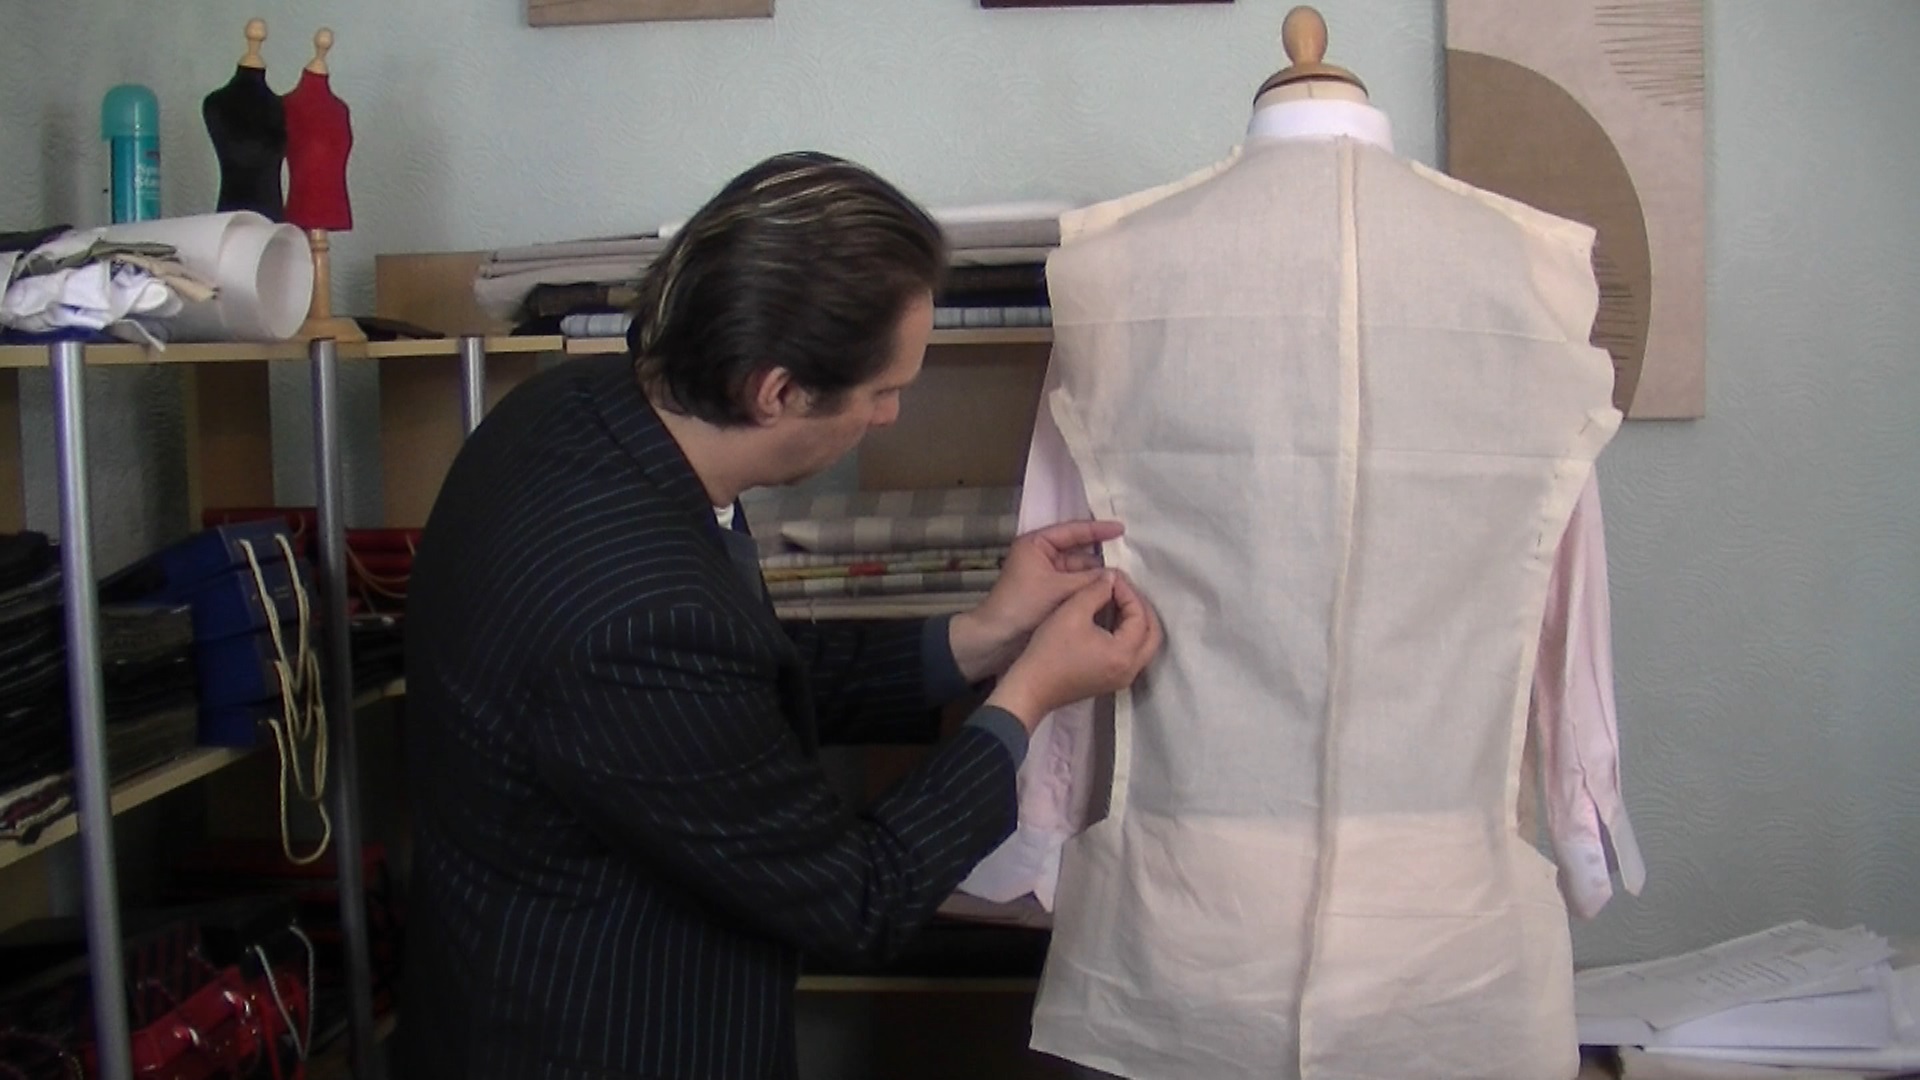 Bespoke tailor michael coates is making adjustments to a toile or slopper #learntosew #howtosew.